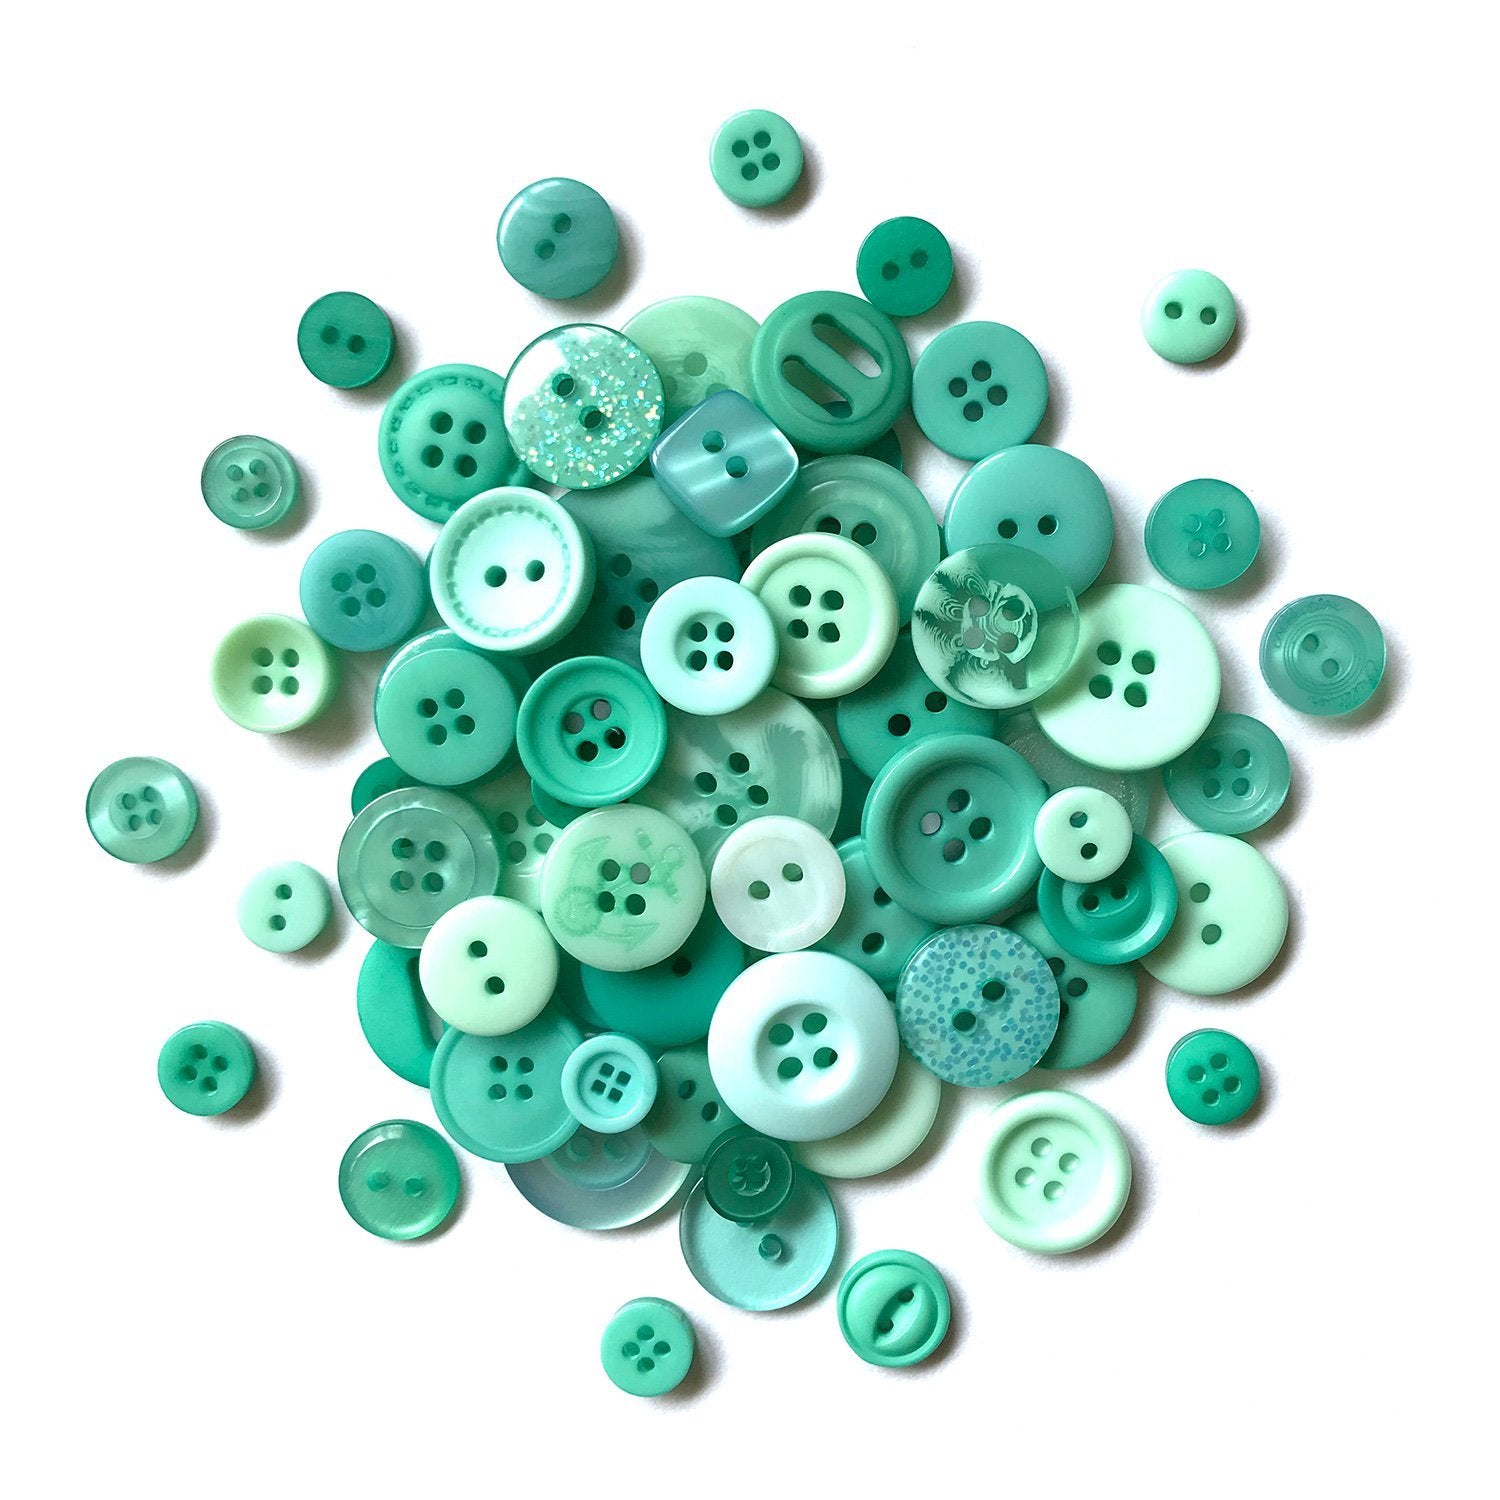 Tidewater-MJ109 - Buttons Galore and More